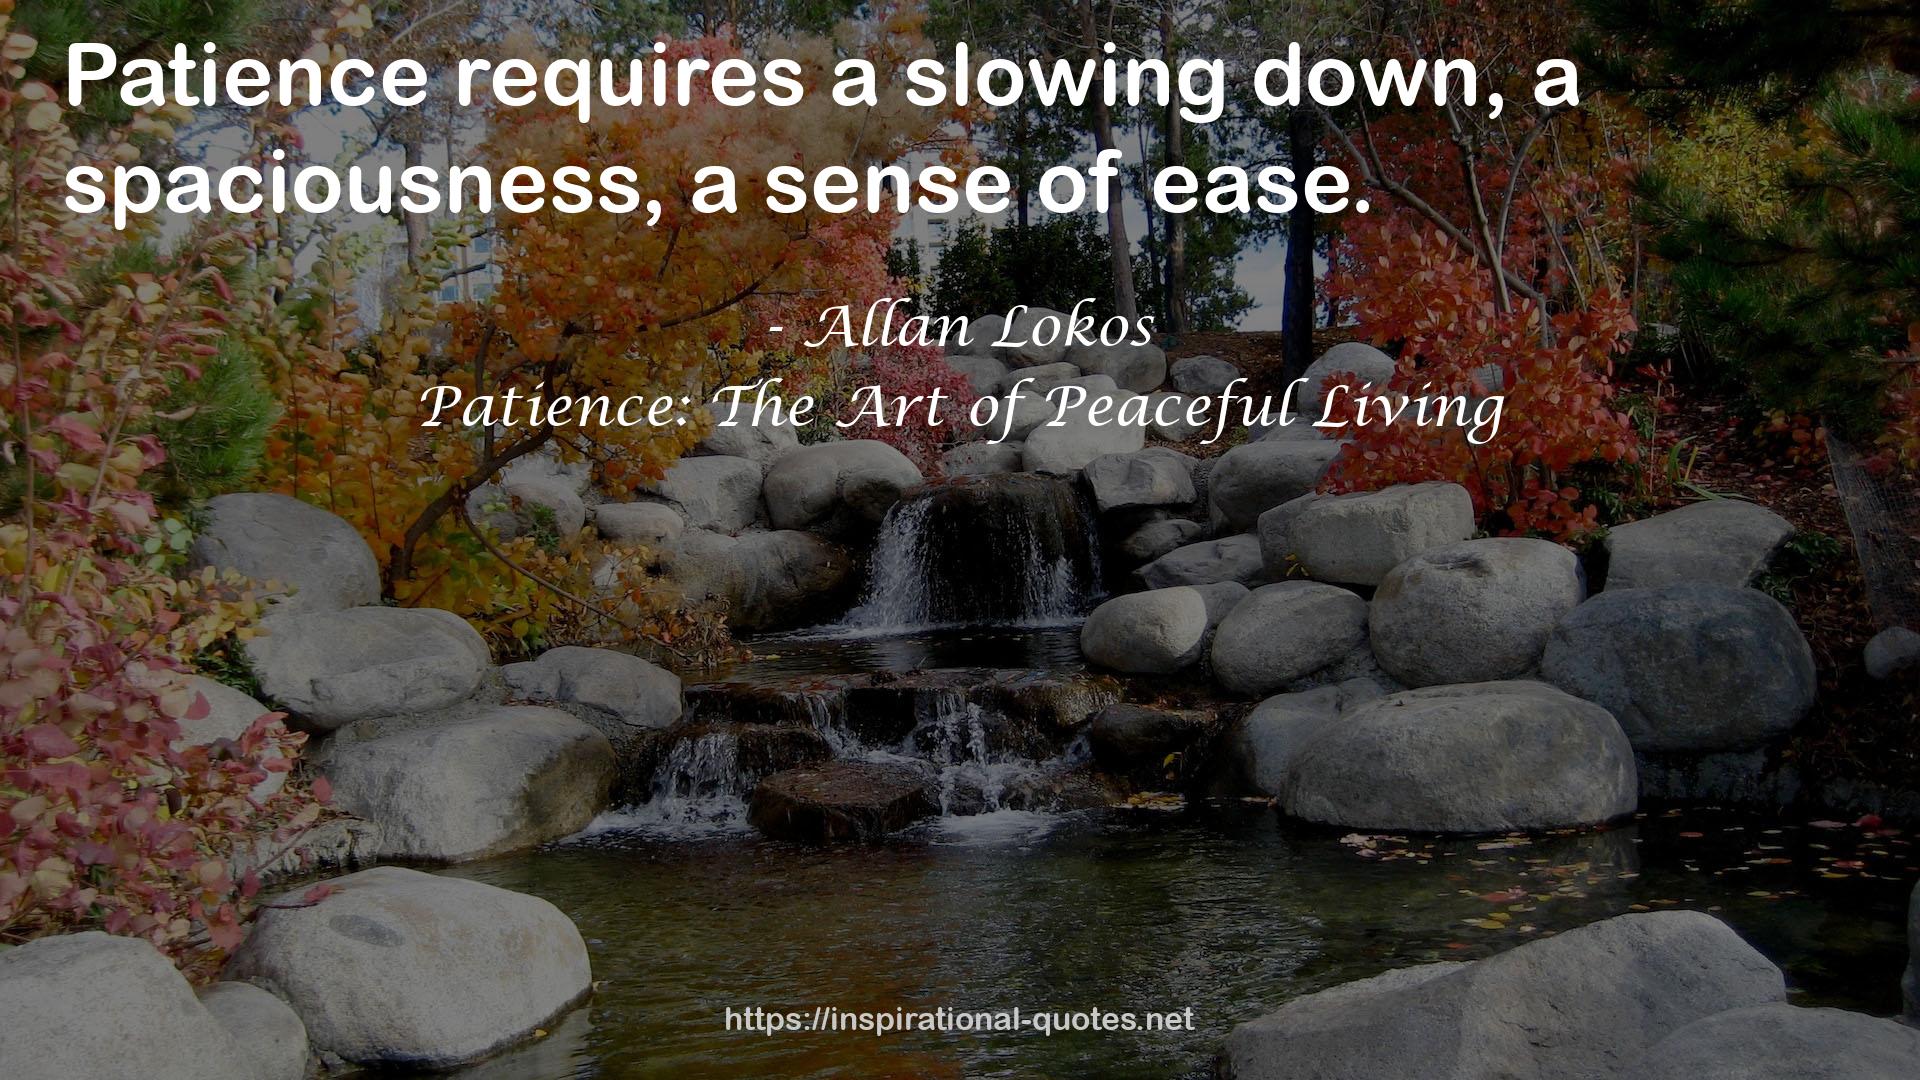 Patience: The Art of Peaceful Living QUOTES